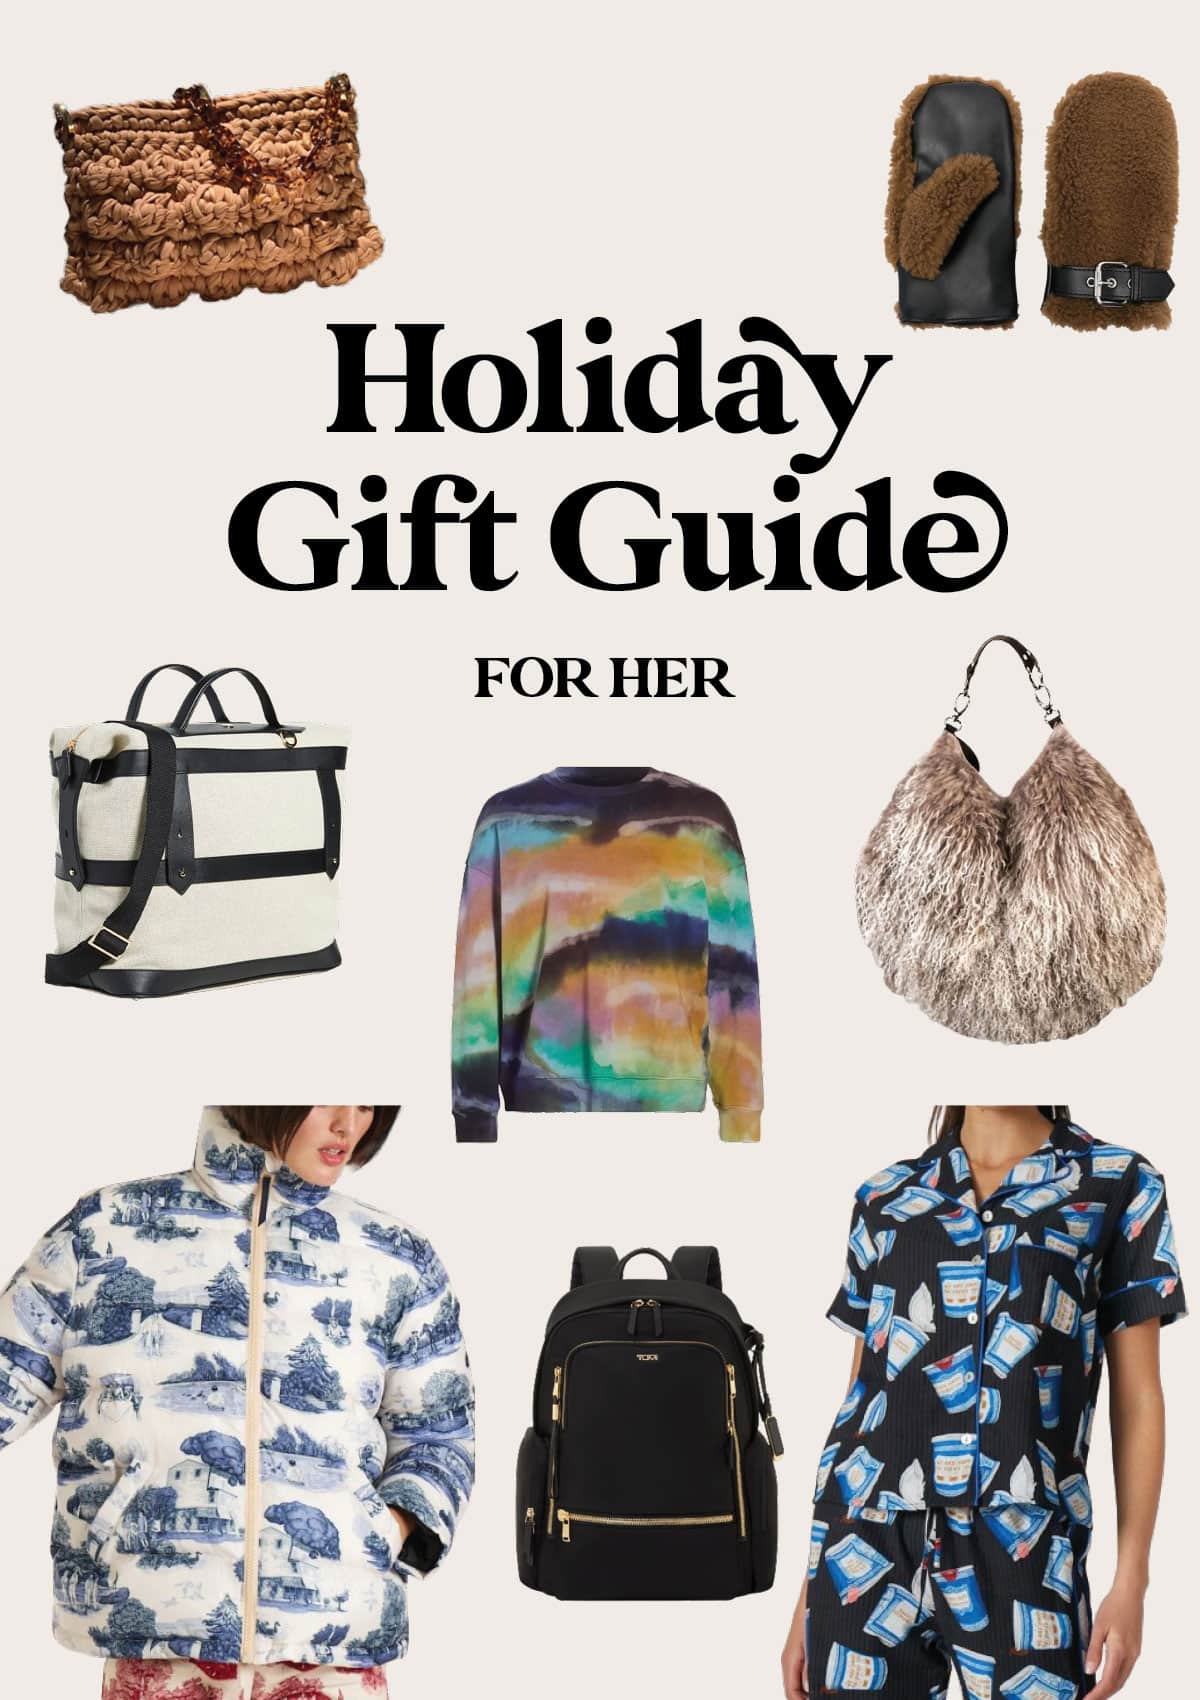 20+ Best Fashion Gifts Under $50 in 2019 - Stylish Gift Ideas for Women